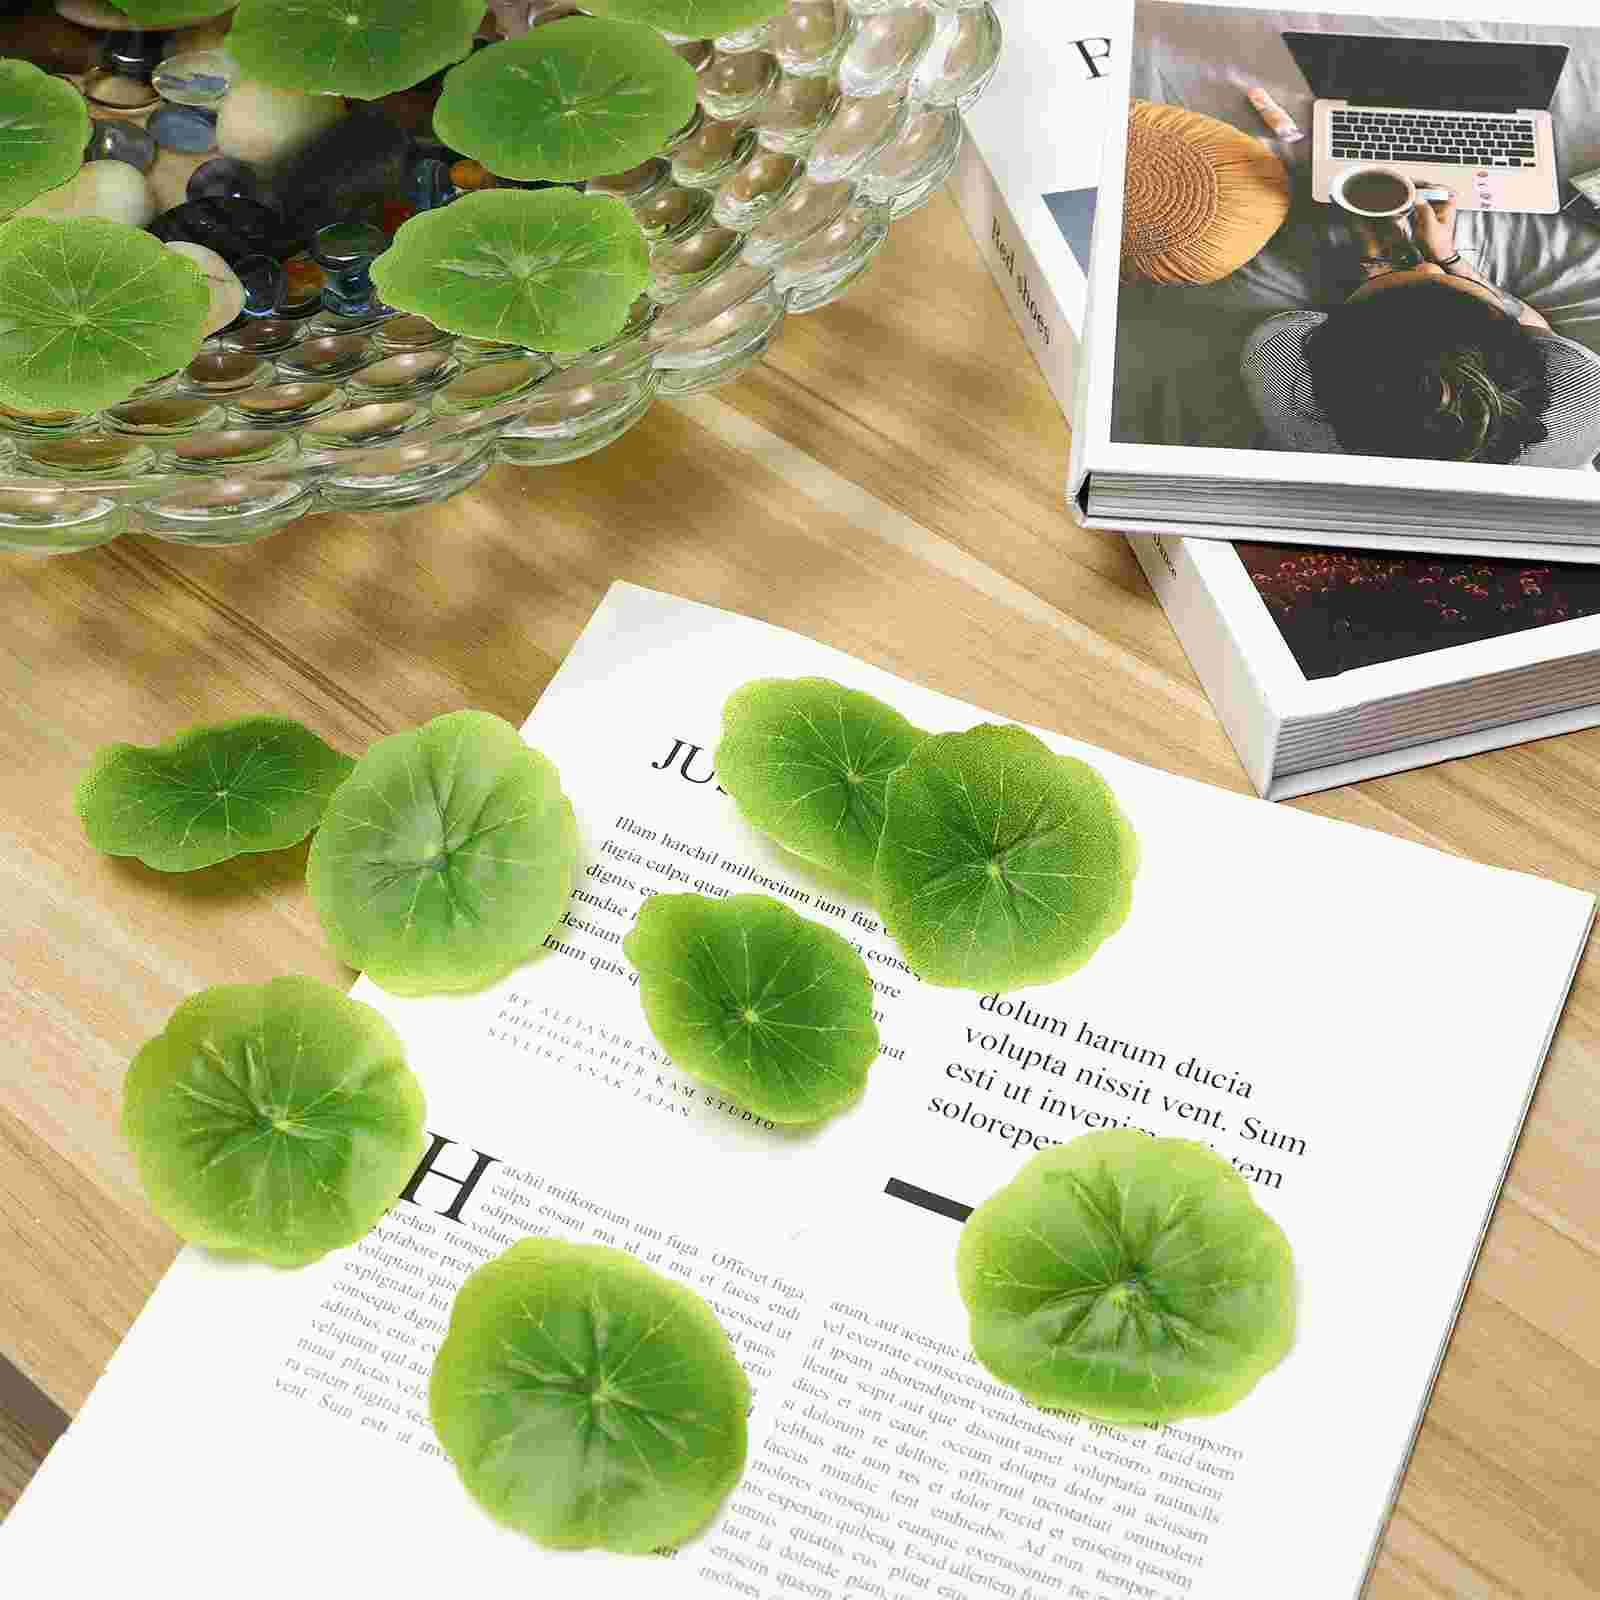 

30 Pcs Fake Lily Pads Outdoor Home Decor Ponds Lotus Leaves Ornaments Fish Tank Artificial Plastic